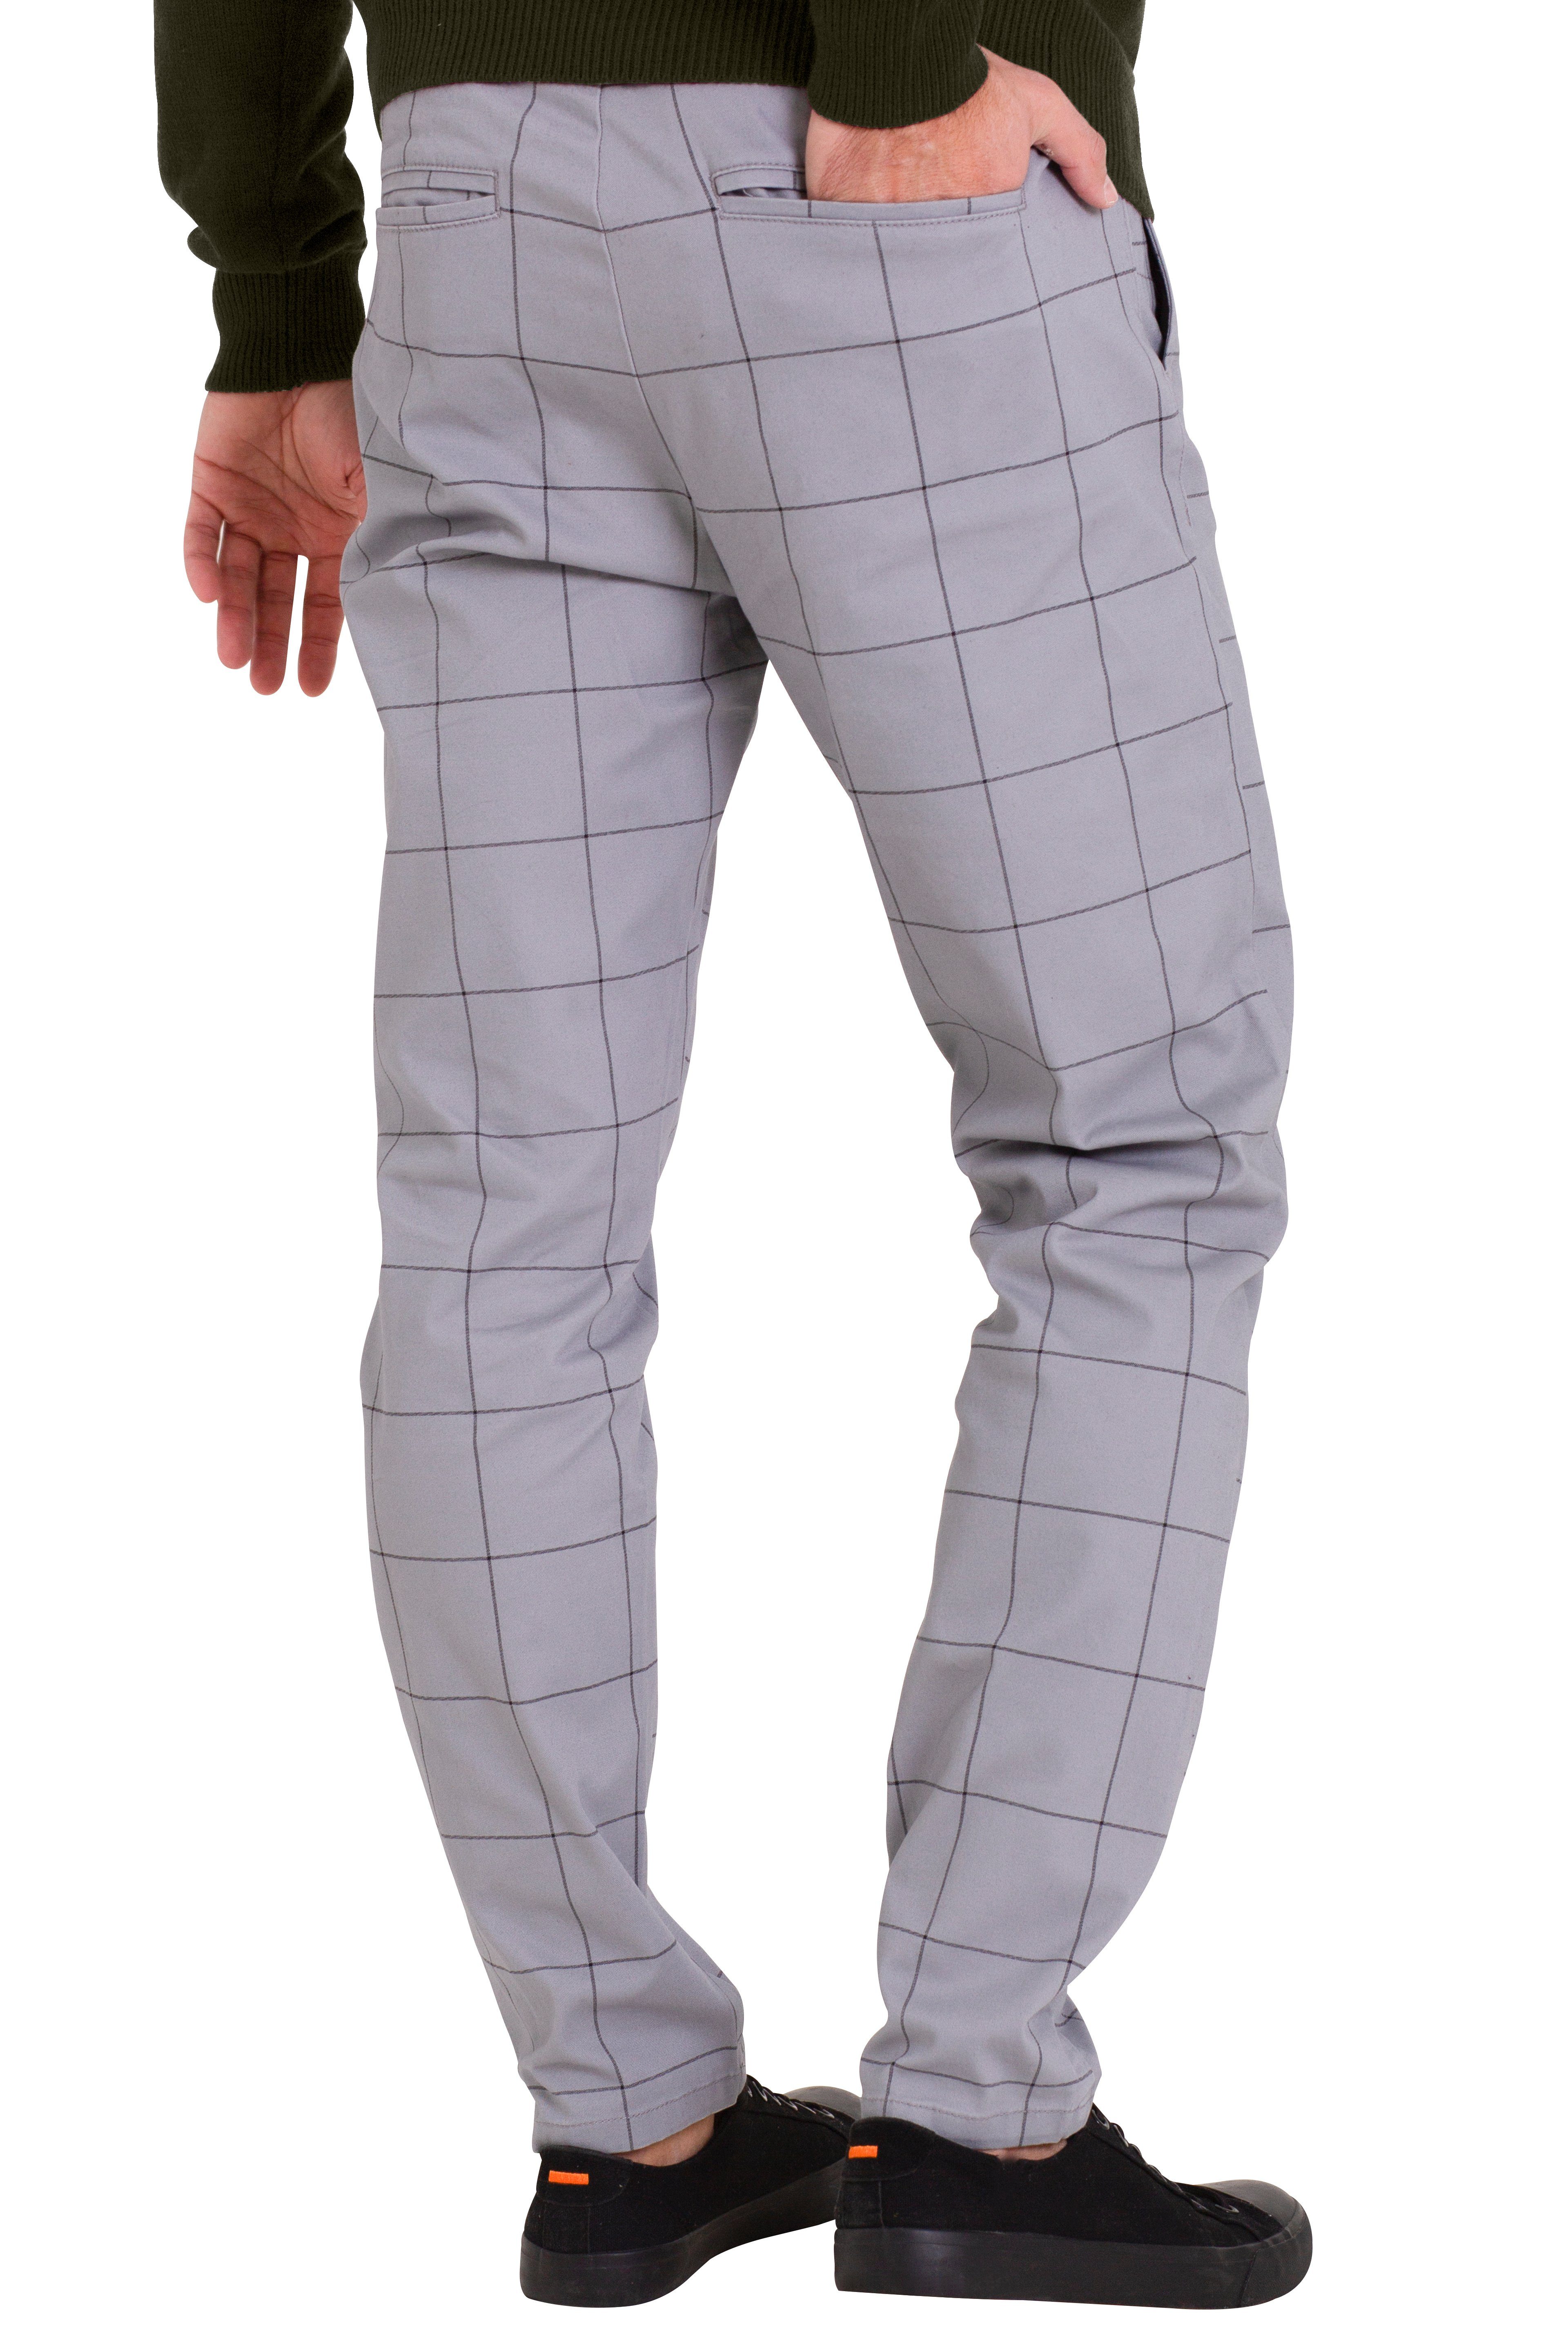 available 4 30''-38'' All Pockets(2 Pants Office 2 Back), Slim-Fit Chinohose Front Hose Herren Hellgrau Formaler BlauerHafen Business Check Vintage sizes Full